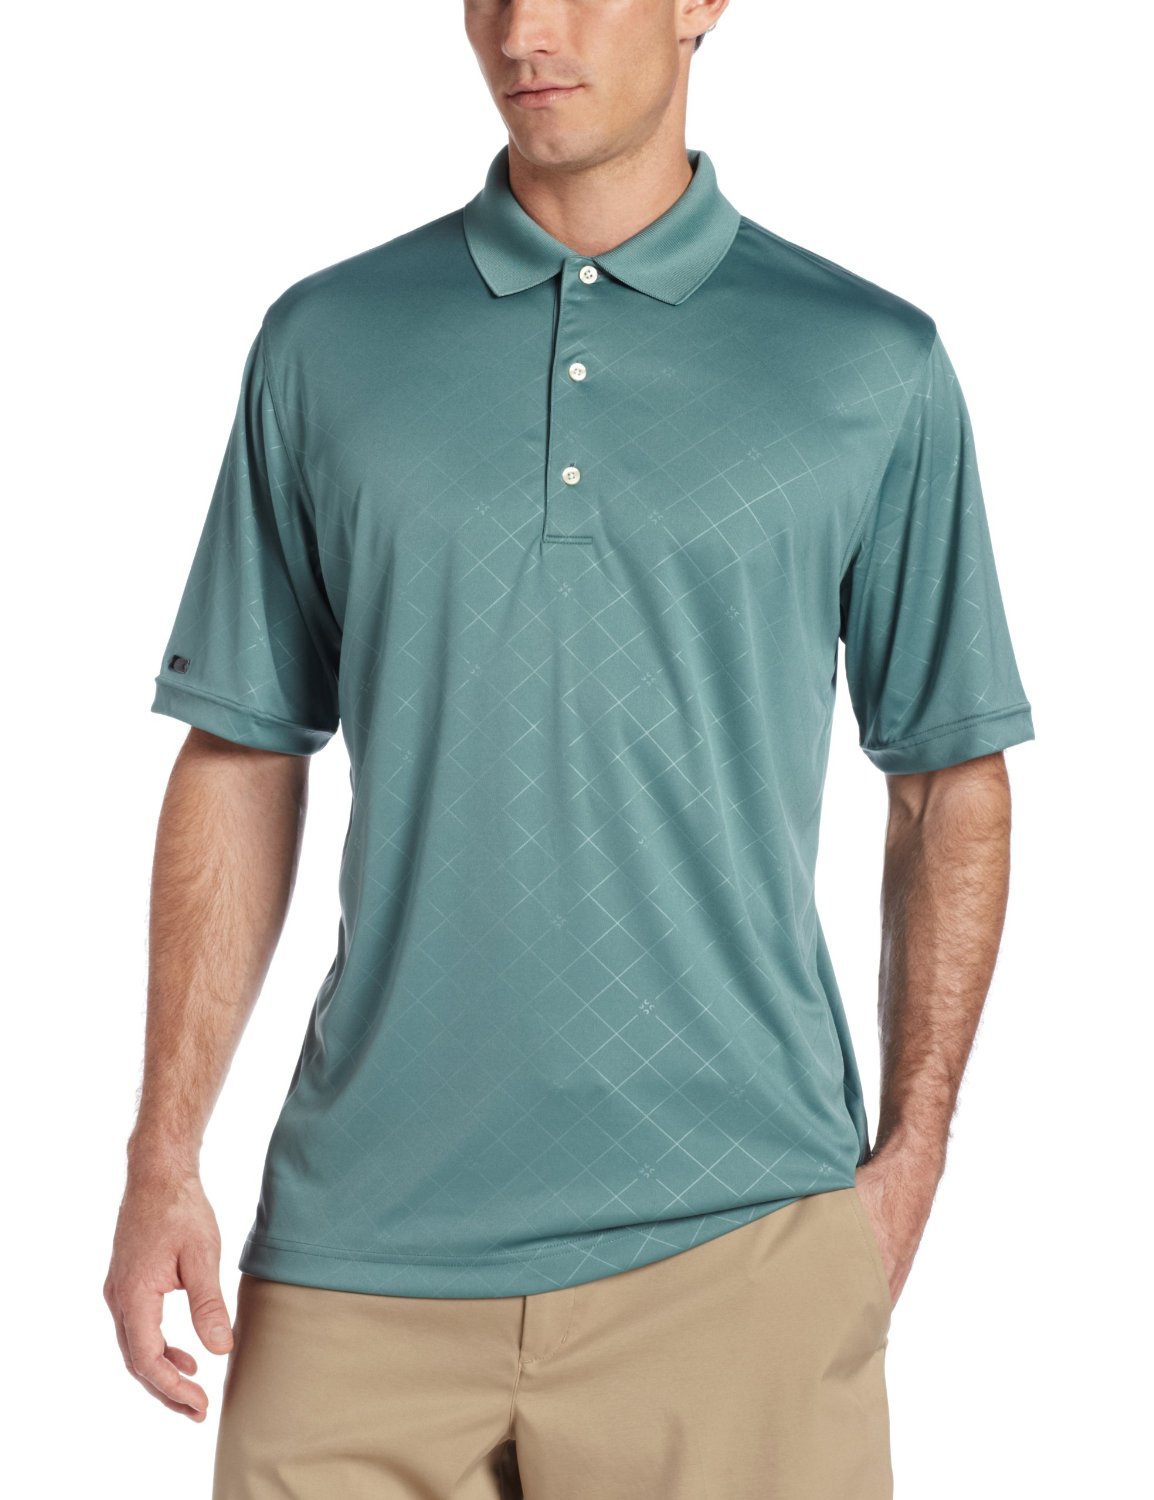 Mens Imperial Embossed Golf Polo Shirts